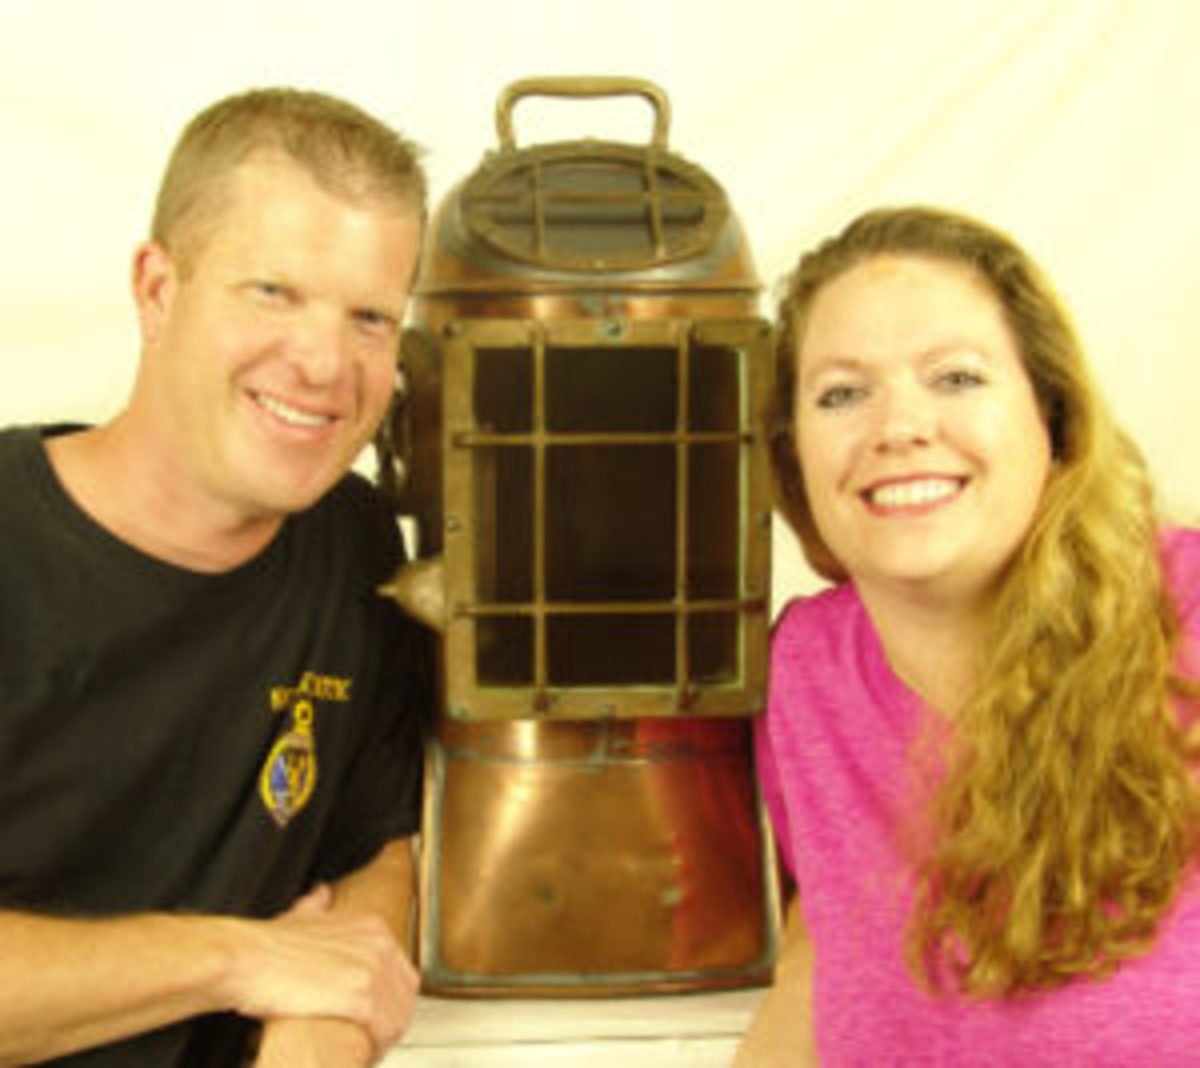  Don and Jenny Creekmore of Nation's Attic, Wichita, Kan., specialize in the buying and selling of vintage diving helmets.